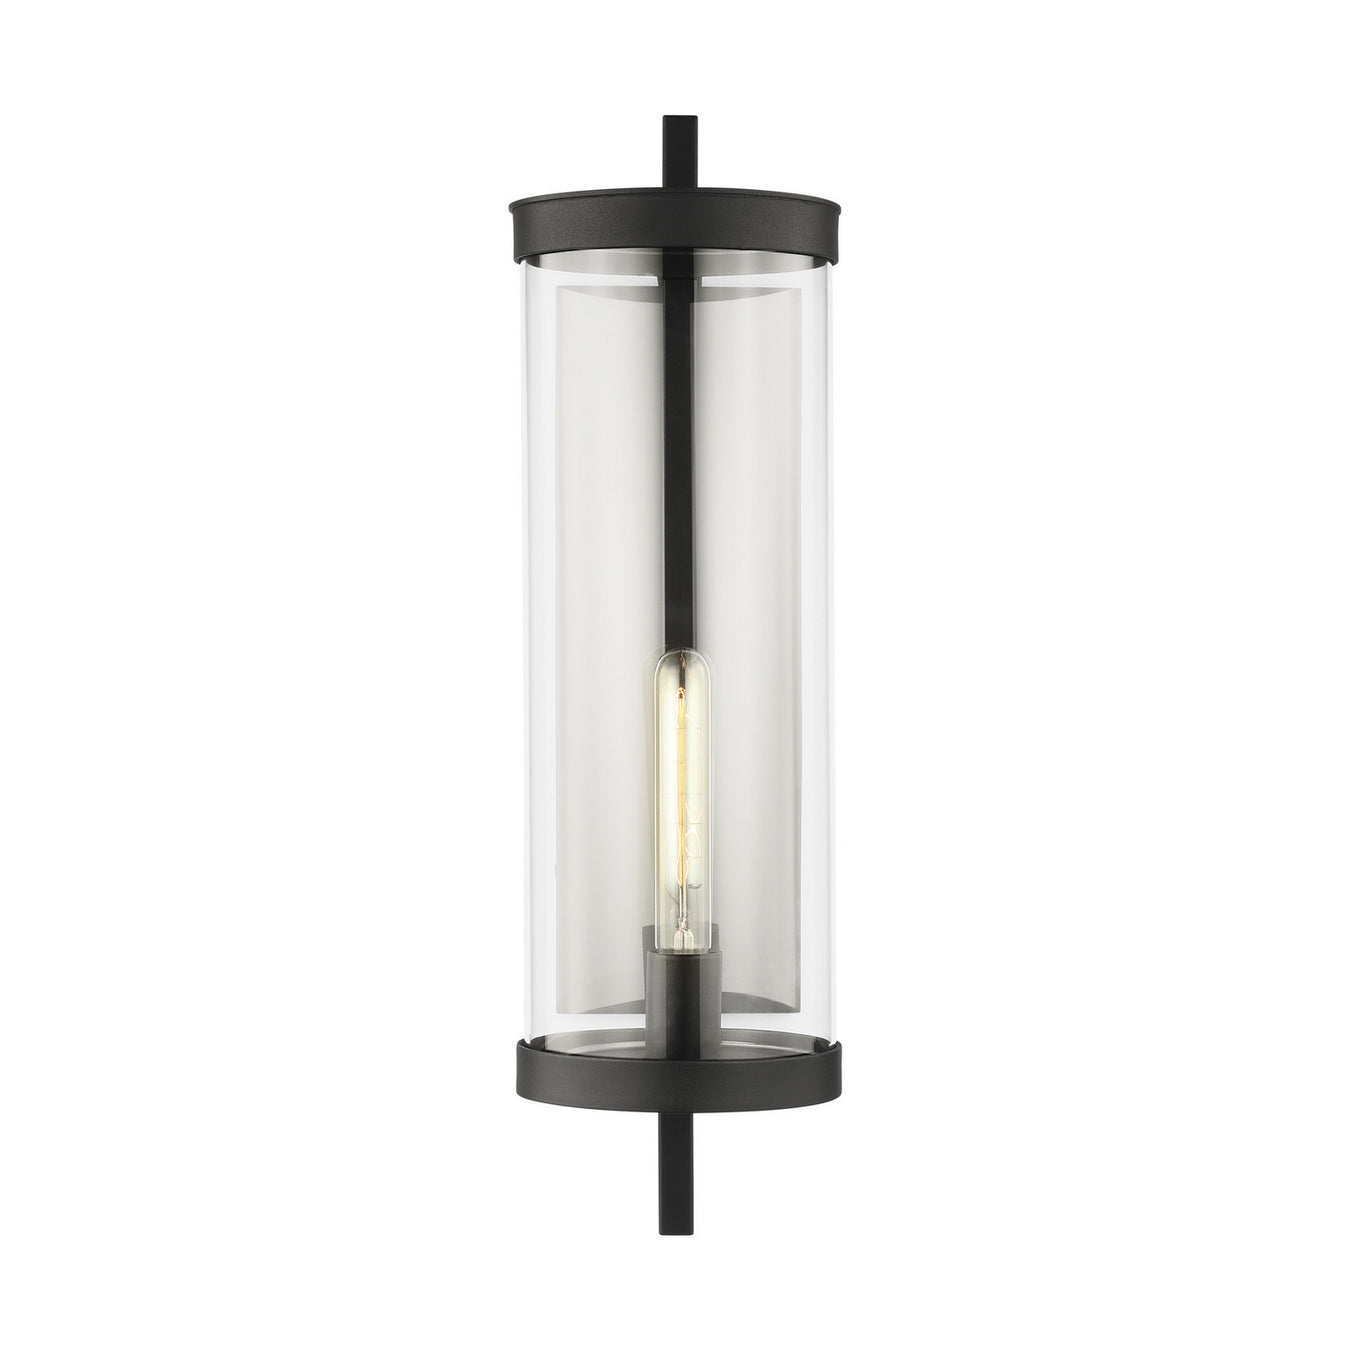 Eastham One Light Wall Lantern in Textured Black